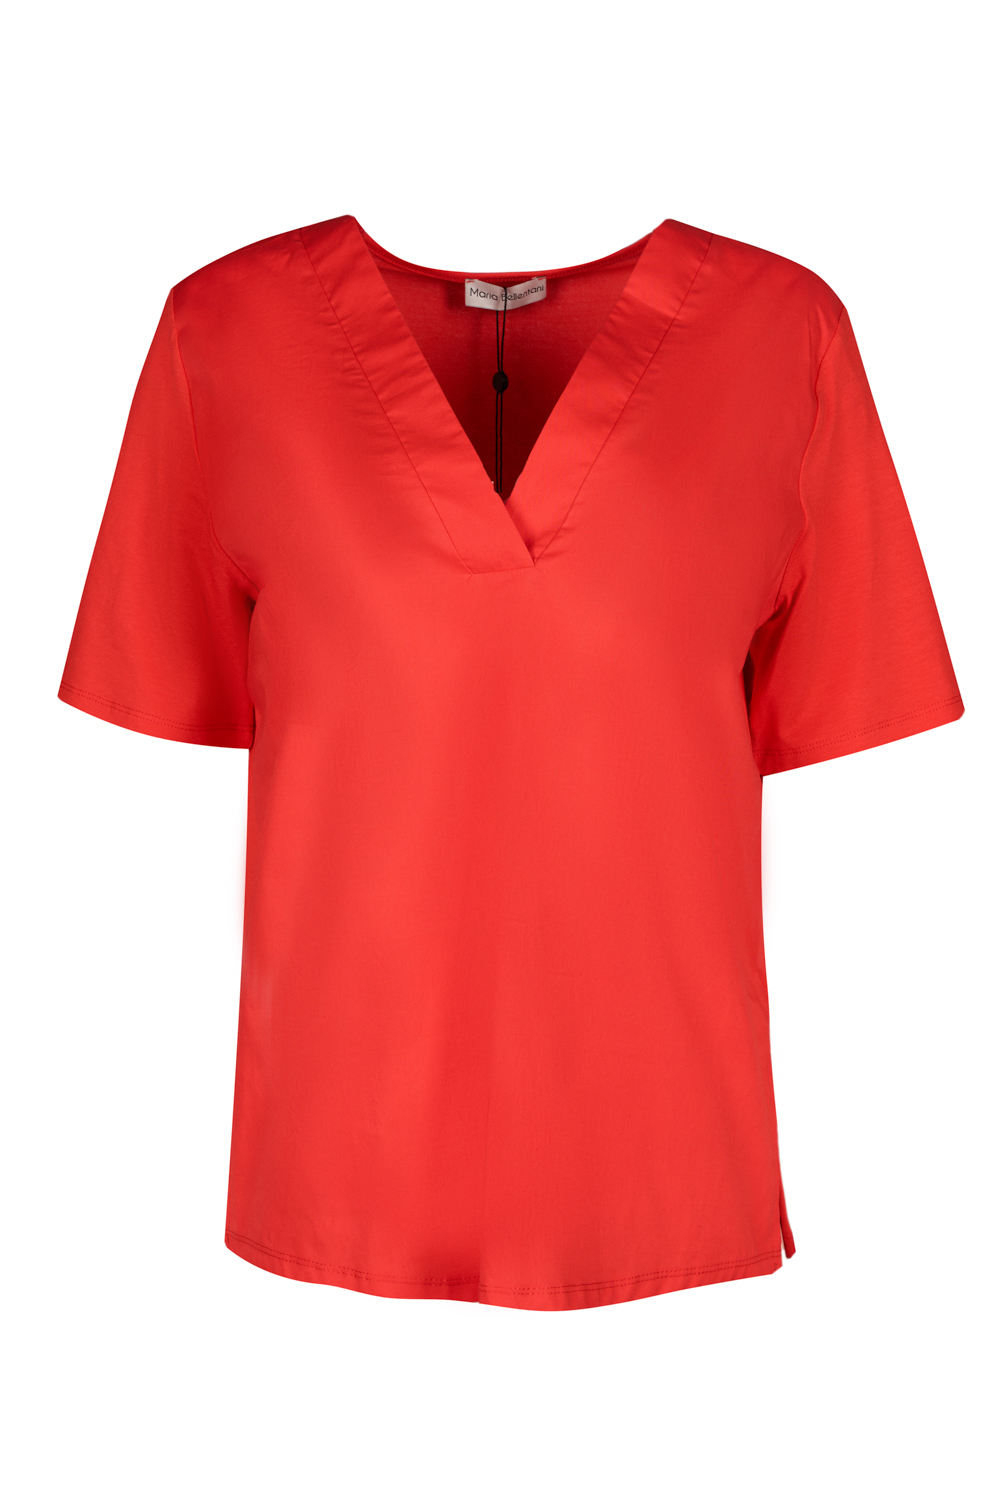 Double Textured V Neck Boxy Blouse with Side Slits